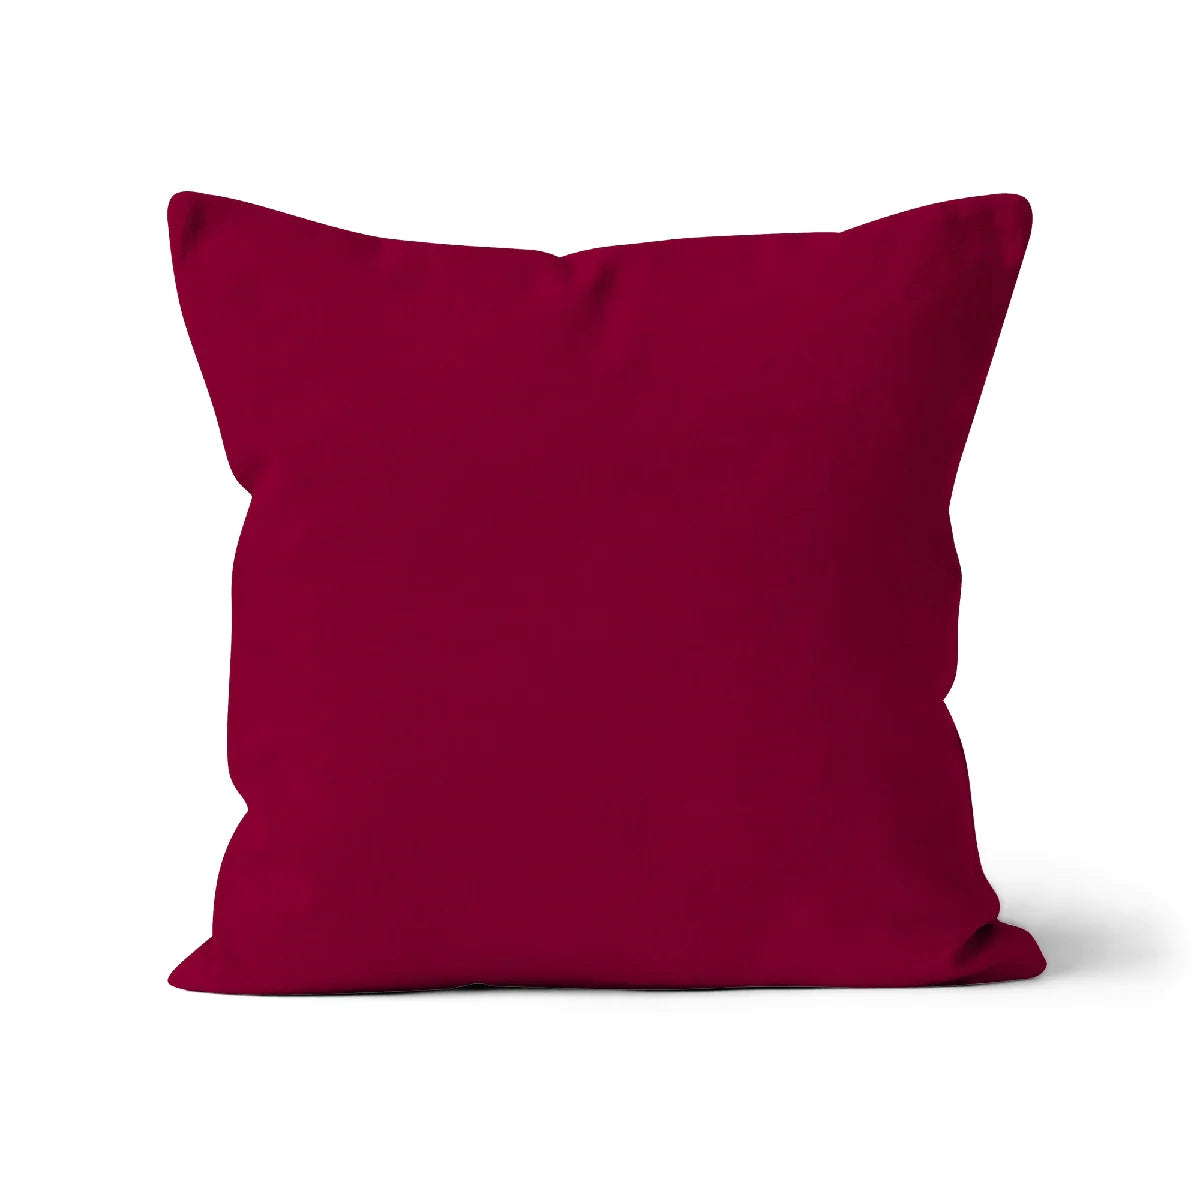 Burgundy cushion cover, Organic cotton, Rich burgundy color, Sustainable home decor, Eco-friendly cushion cover, Handcrafted cushion, Textured cotton fabric cushion , Deep red pillowcase,  wine red accent cushion , Eco-conscious cushion, burgundy  cushion cover, Deep maroon cushion, 